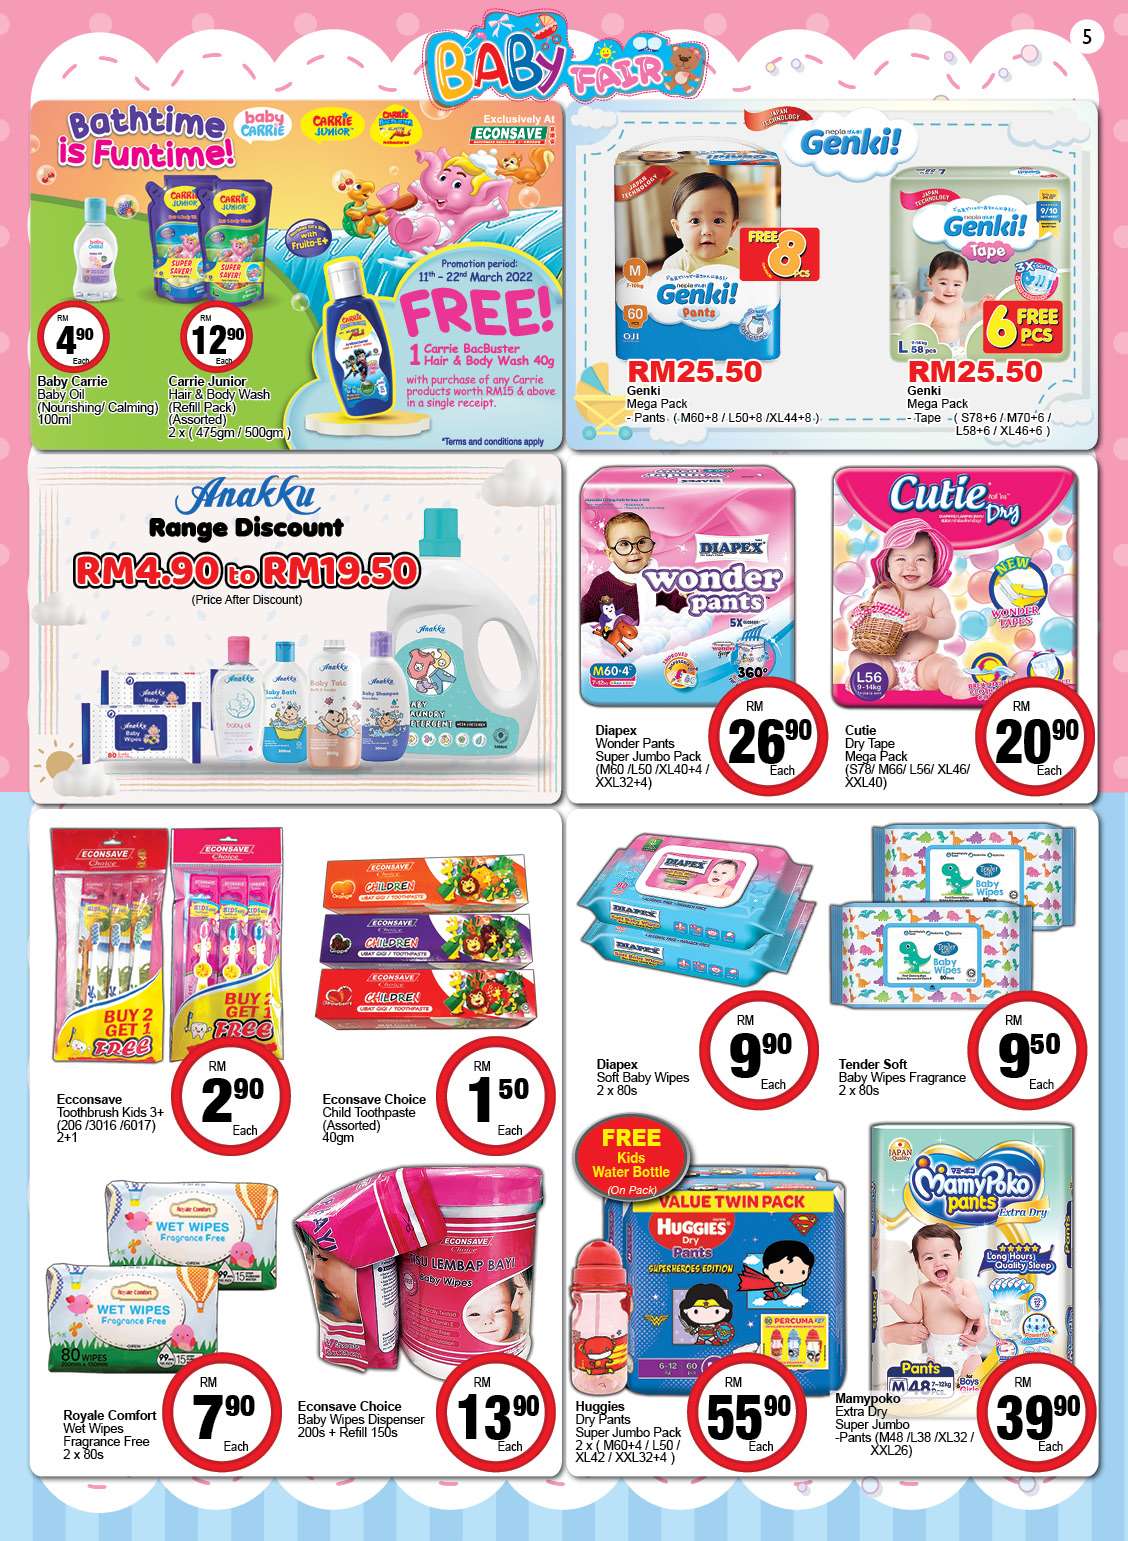 EconSave Catalogue (11 March 2022- 22 March 2022)